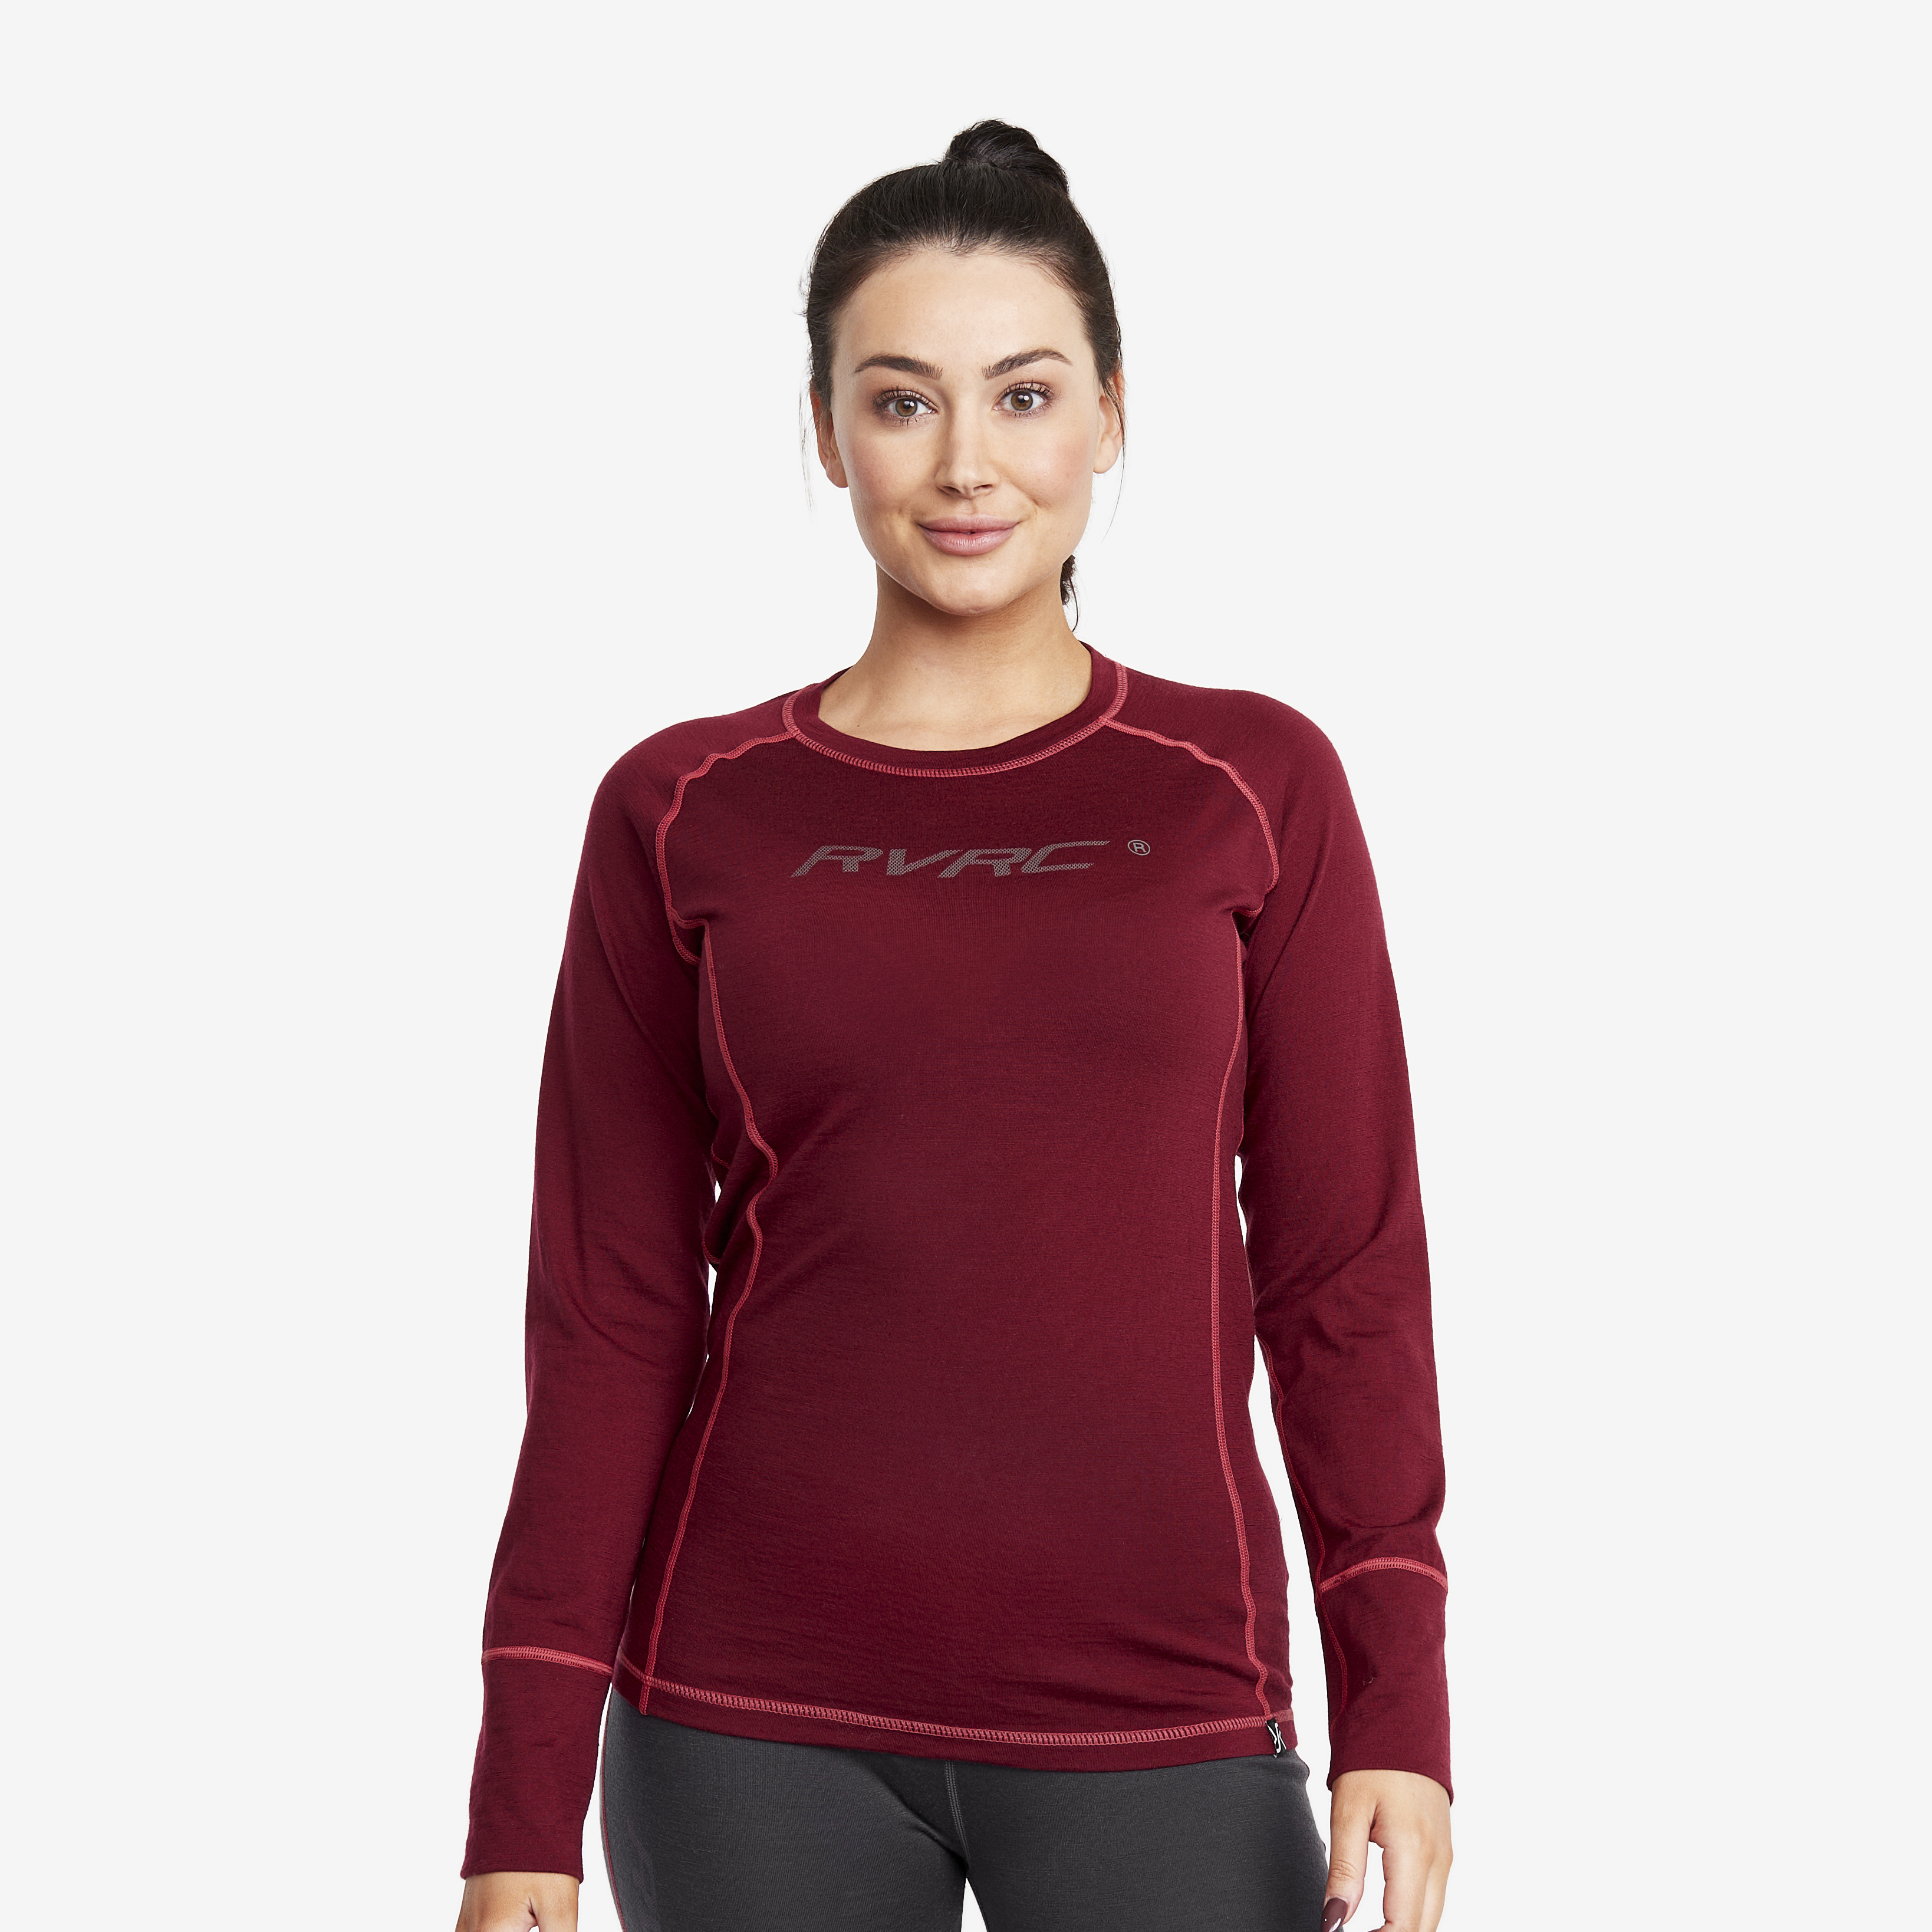 Outright Merino Top Bison Red/ Anthracite Women